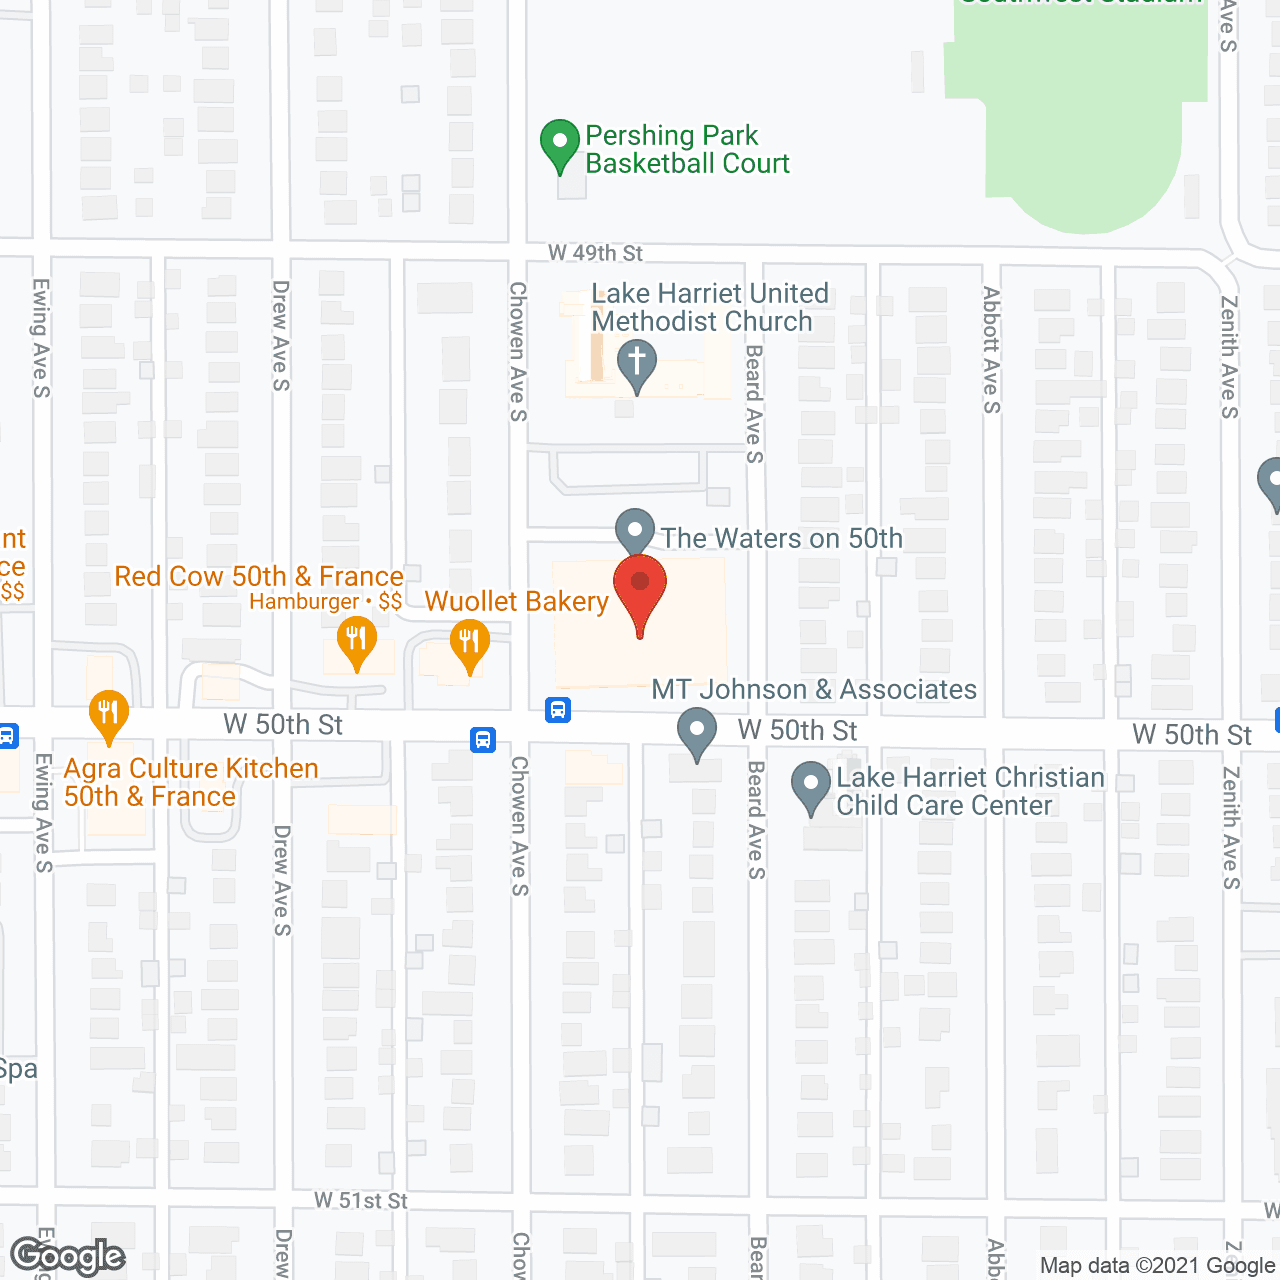 The Waters on 50th in google map